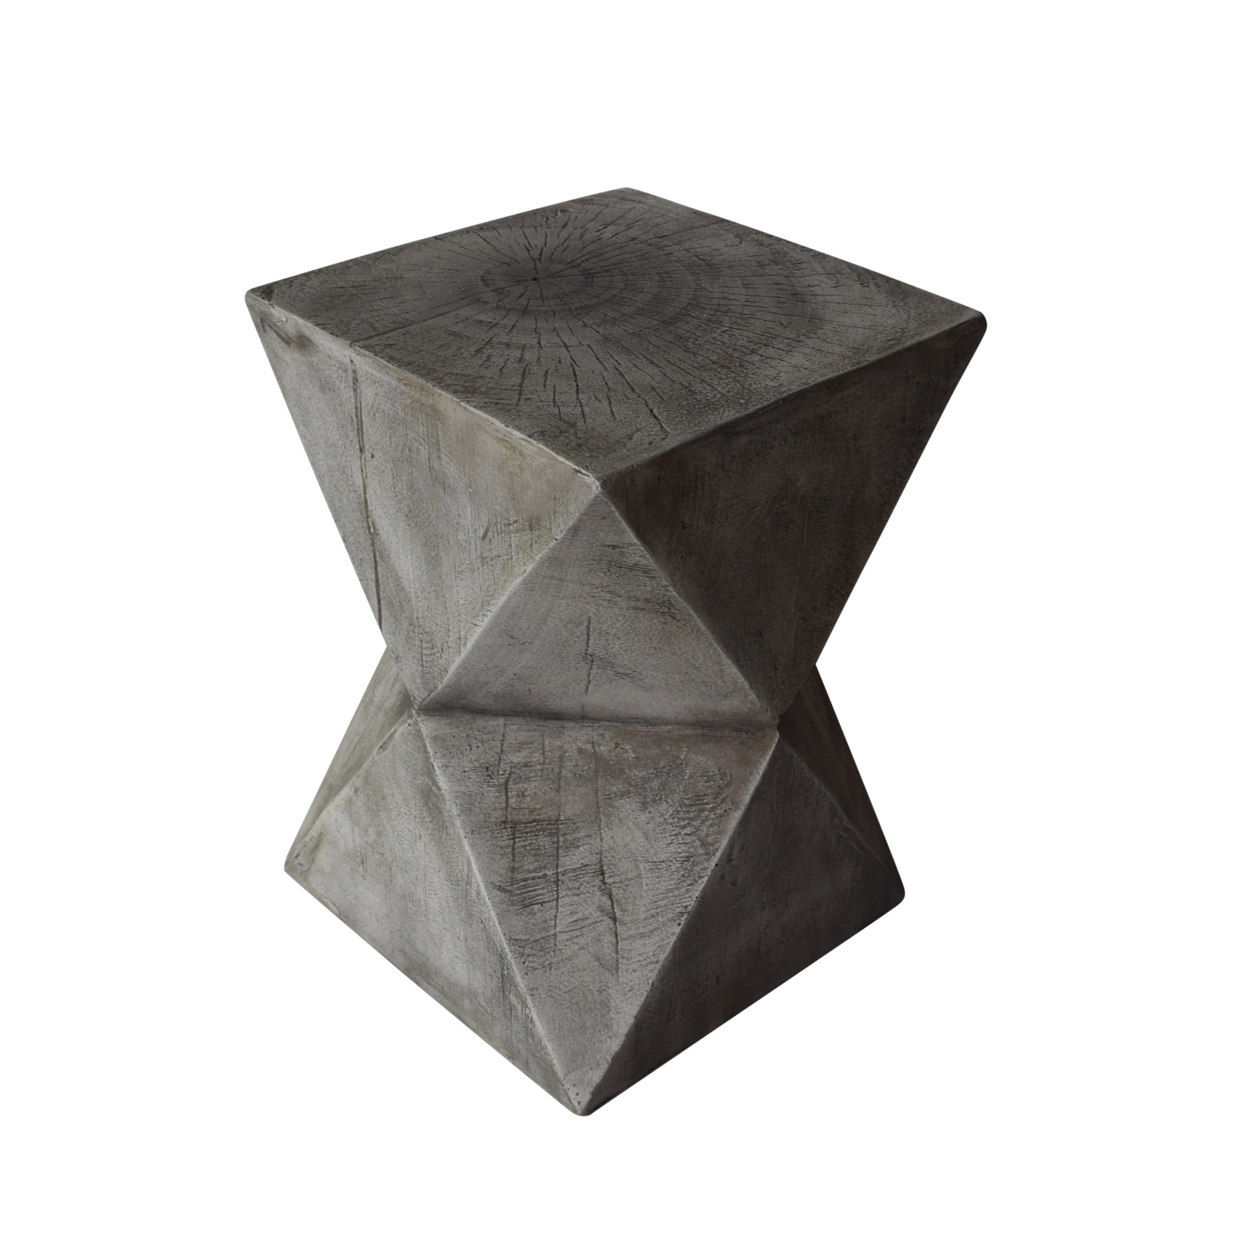 Lux Outdoor Light-Weight Concrete Accent Table - Light Gray